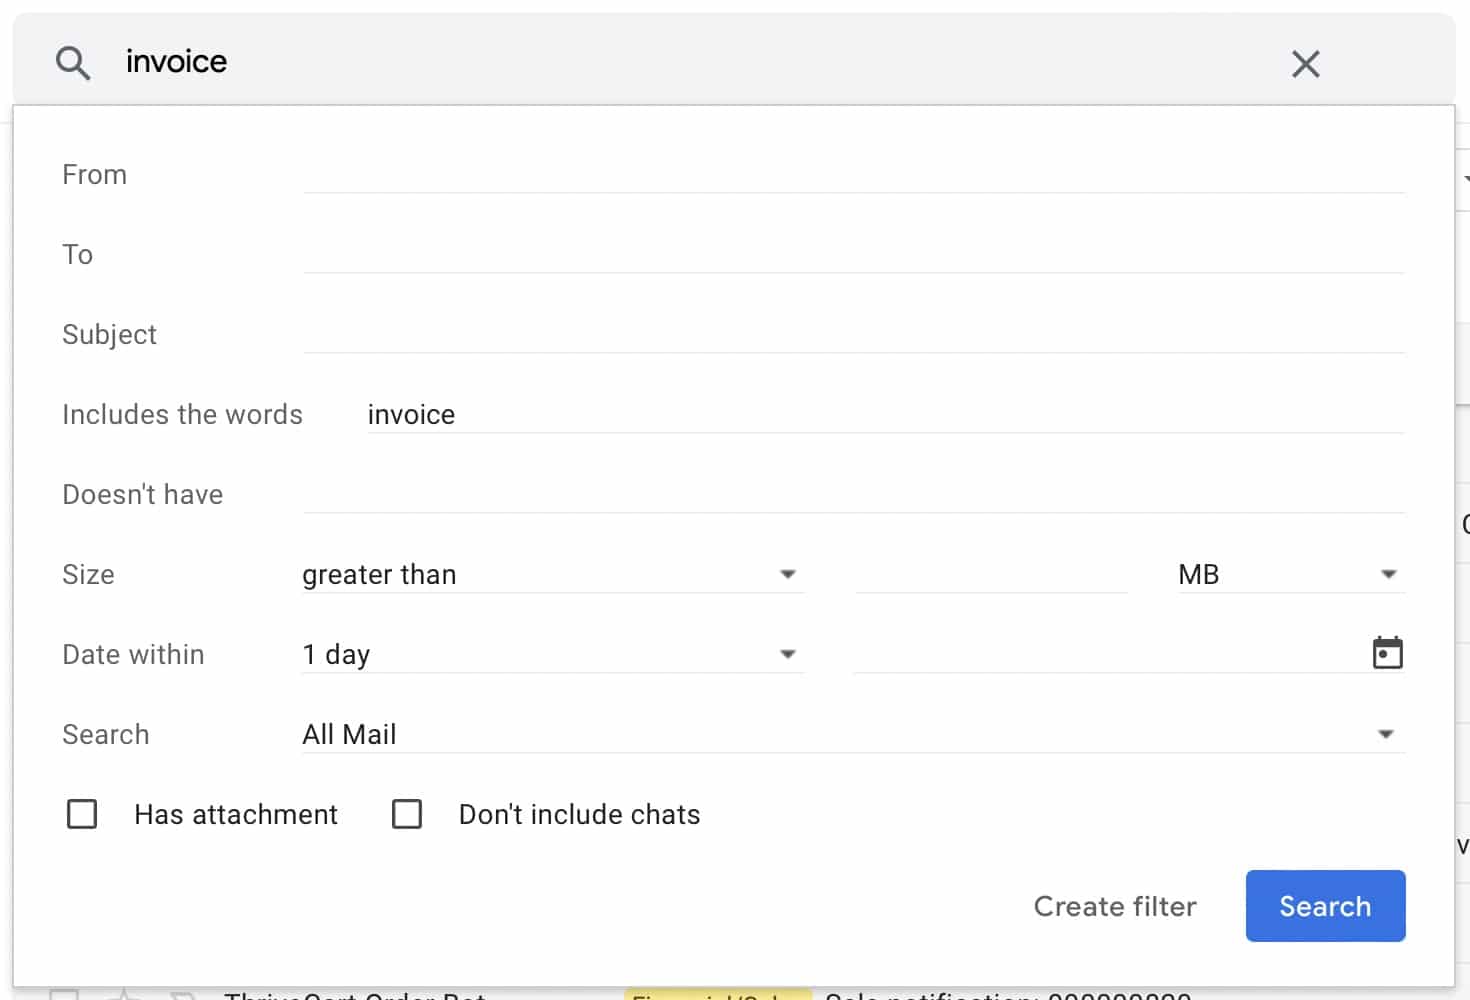 window to create a new filter in Gmail